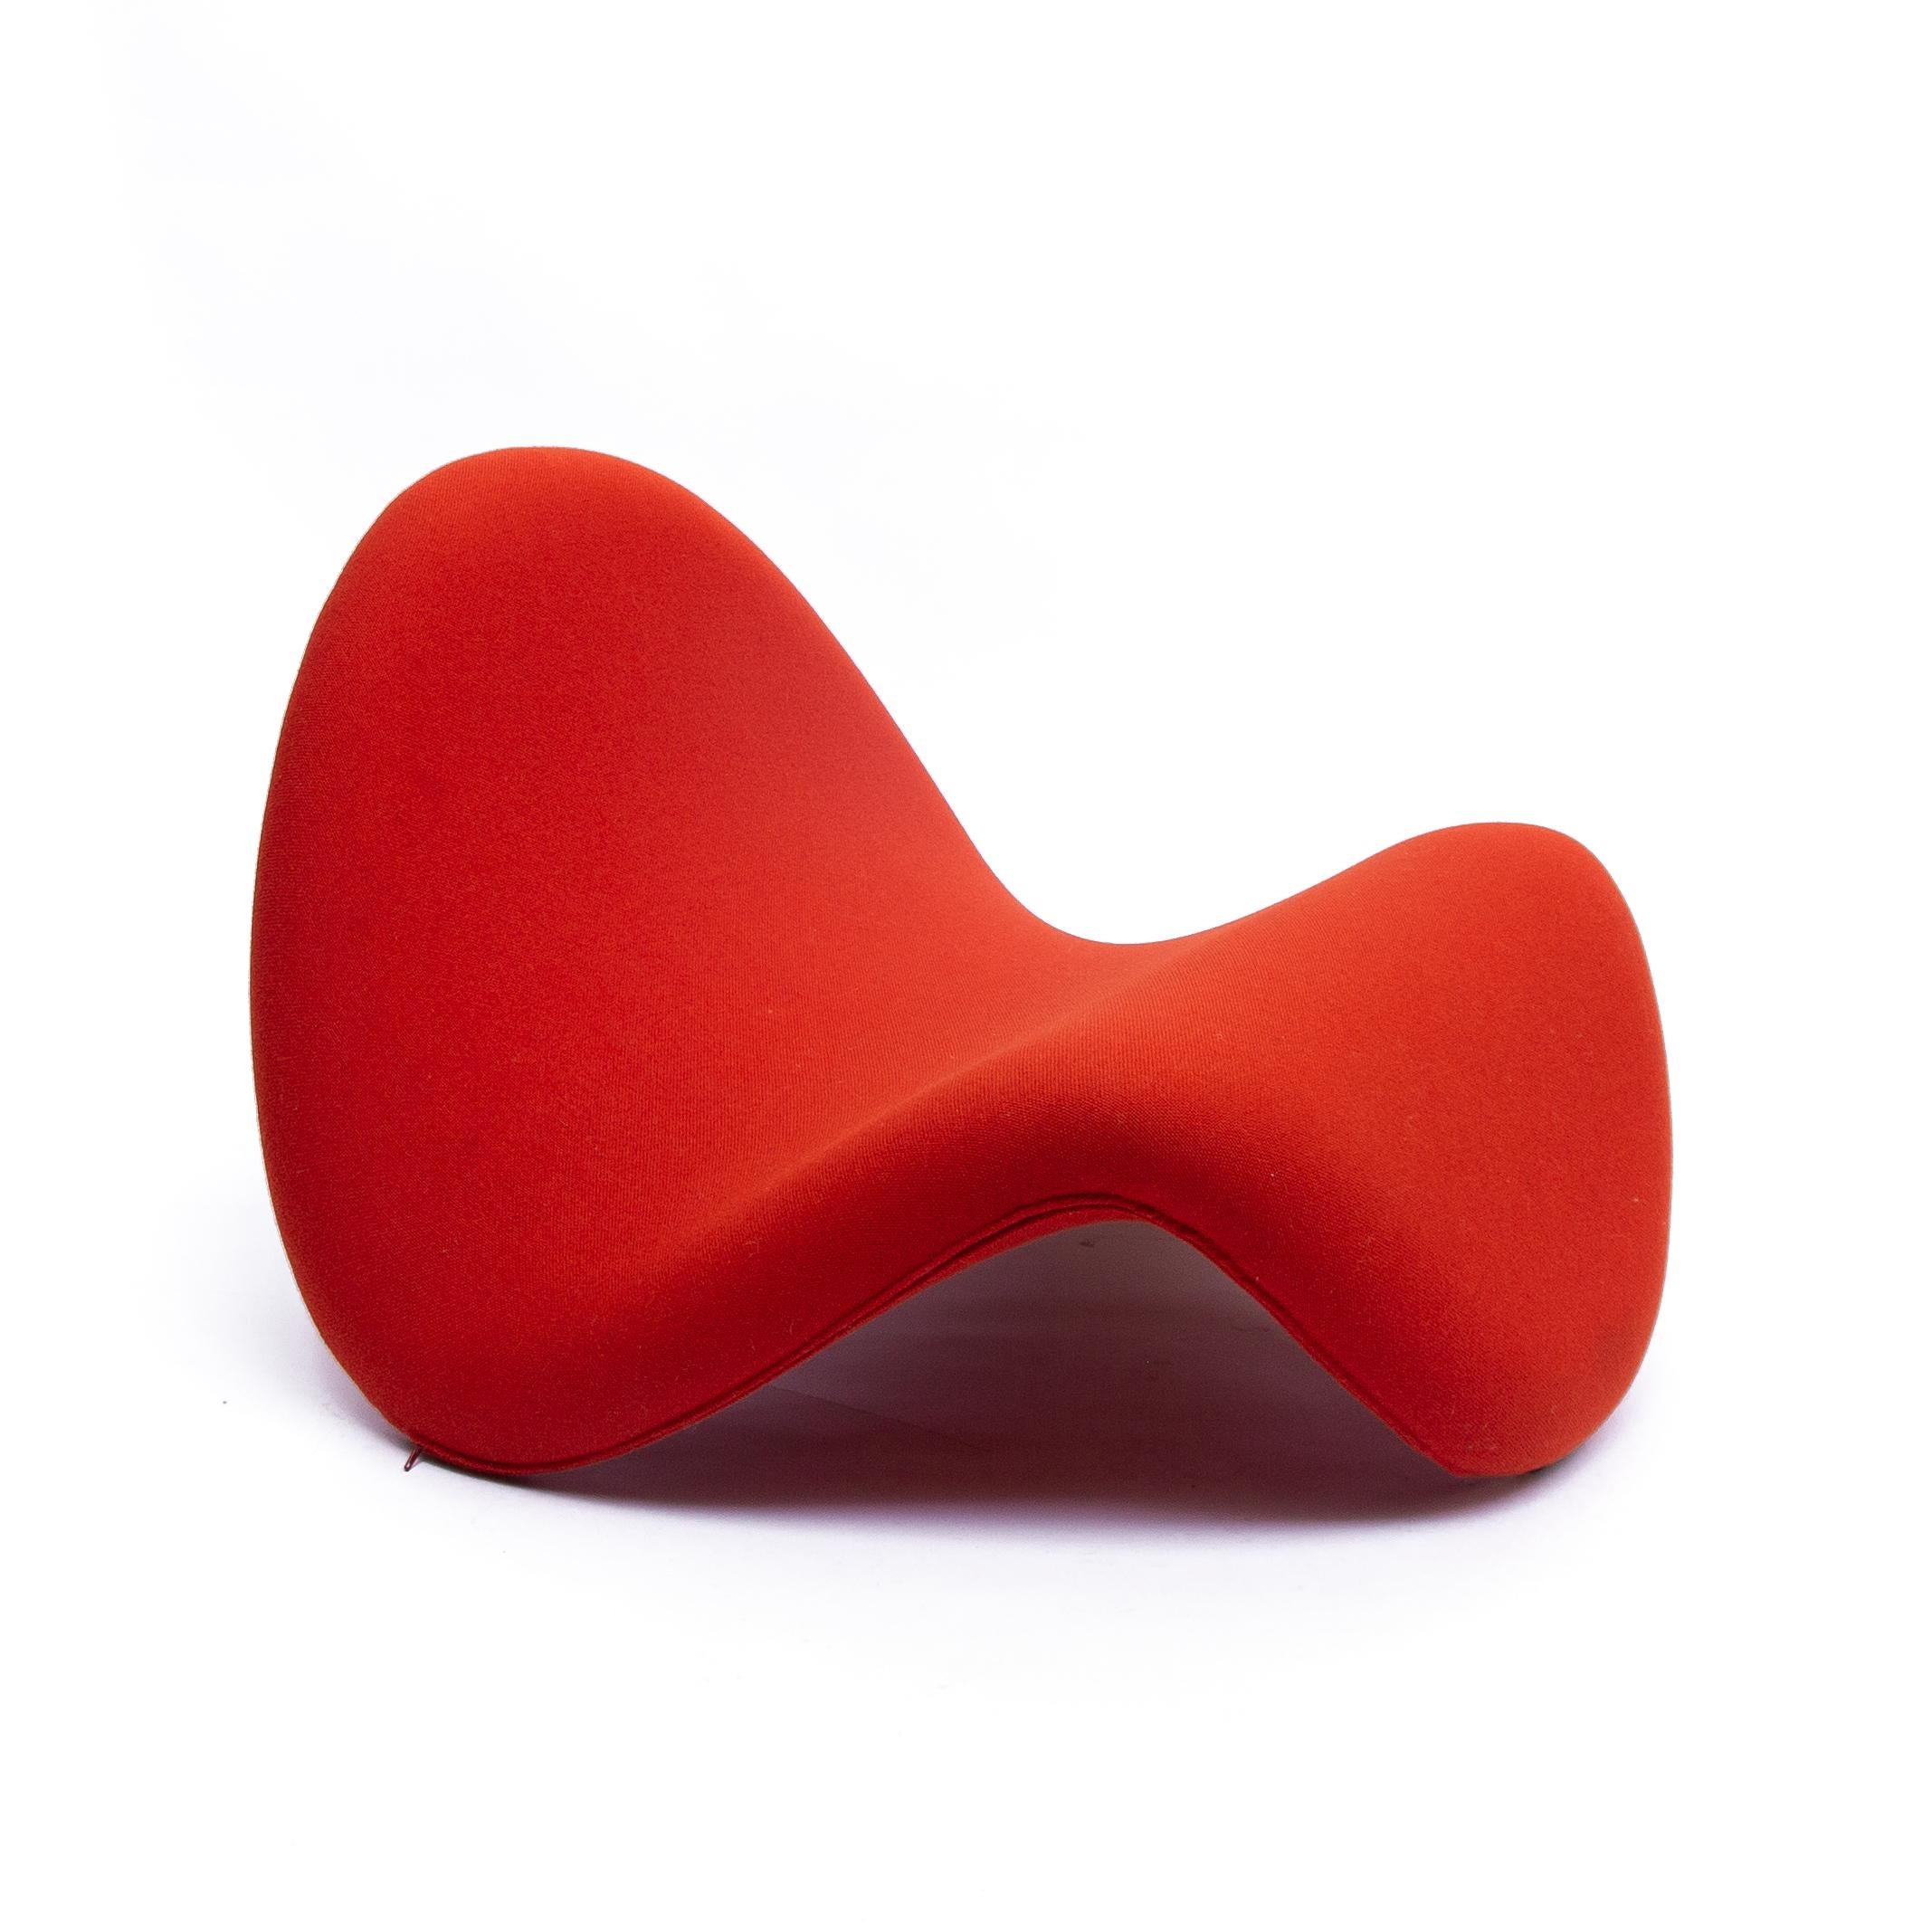 The Artifort tongue is a beautiful sculptural armchair. The tongue chair was designed by Pierre Paulin for Artifort in 1967. It is one of the essential classics in modern furniture history. The tongue is a clear expressive and almost nonchalant